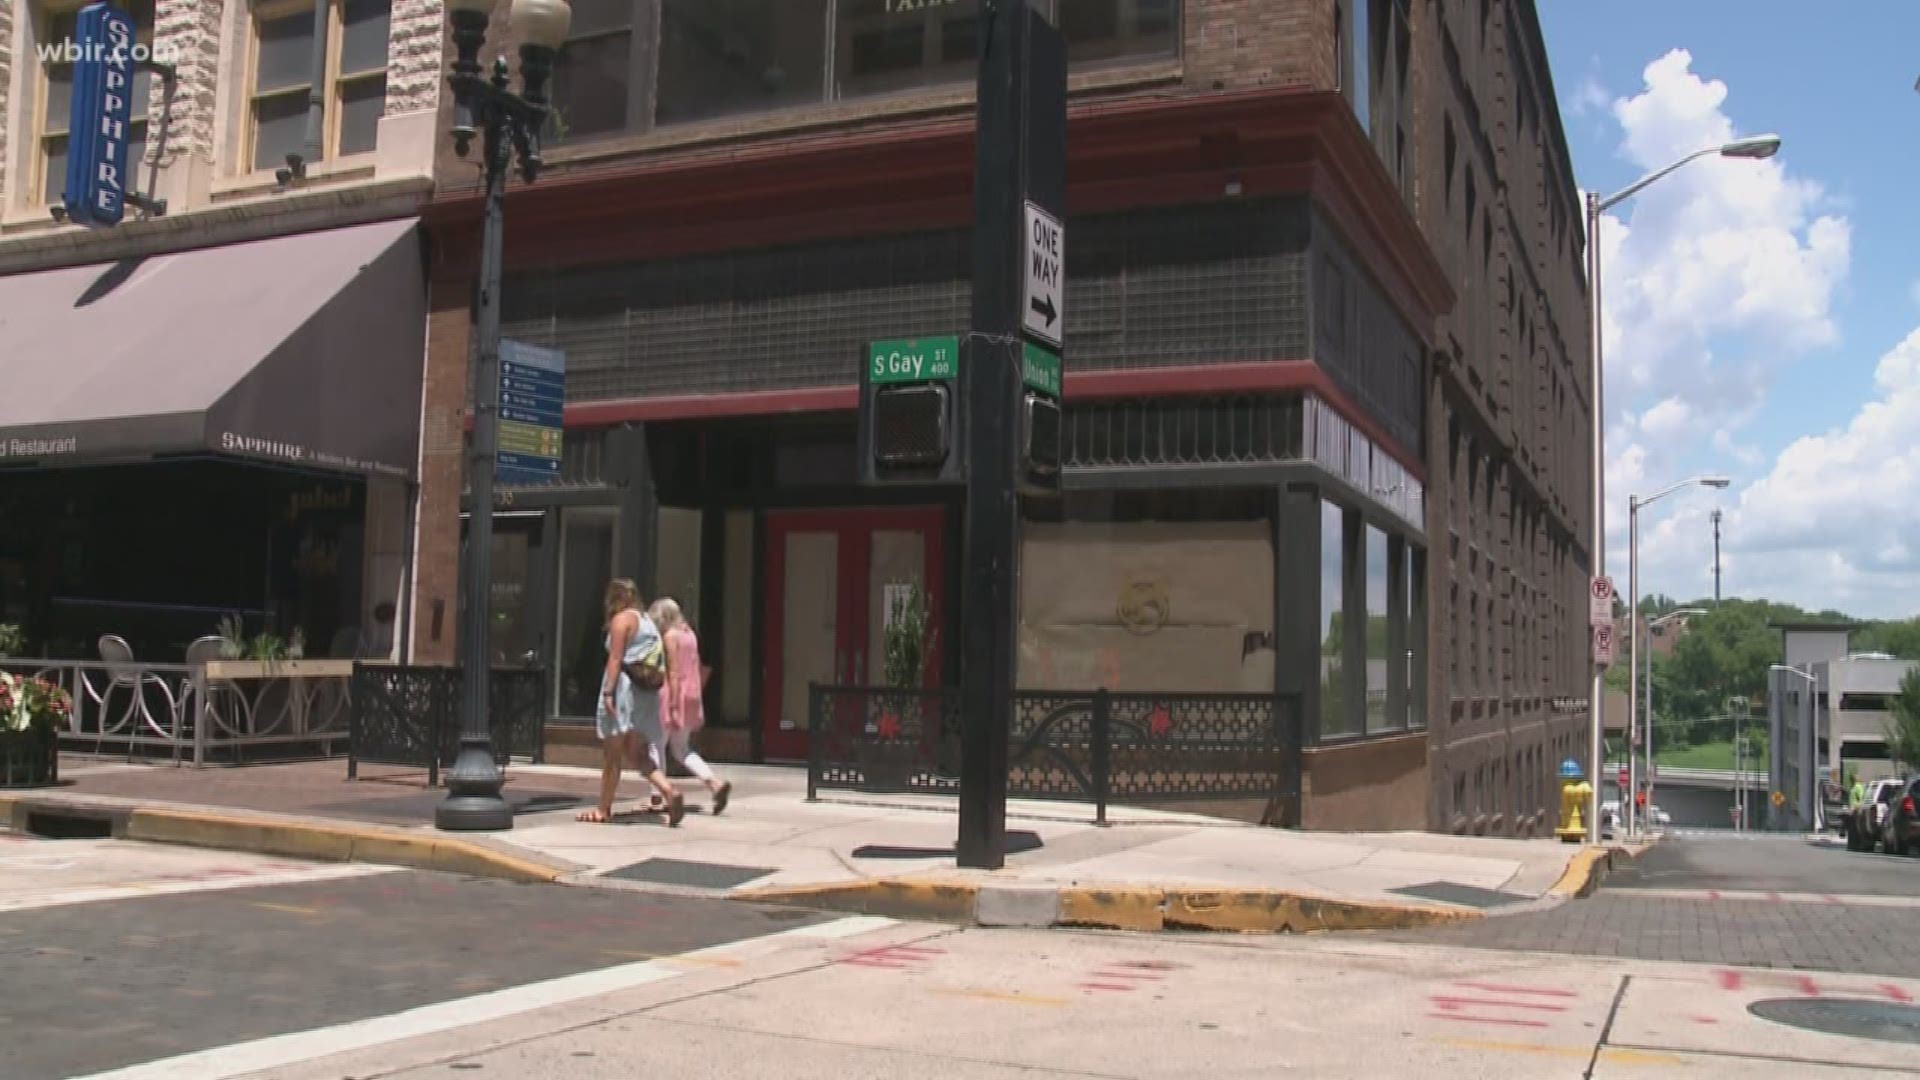 The new location will be at the corner of Gay and Union streets. Blackhorse hopes to open in mid-late August.